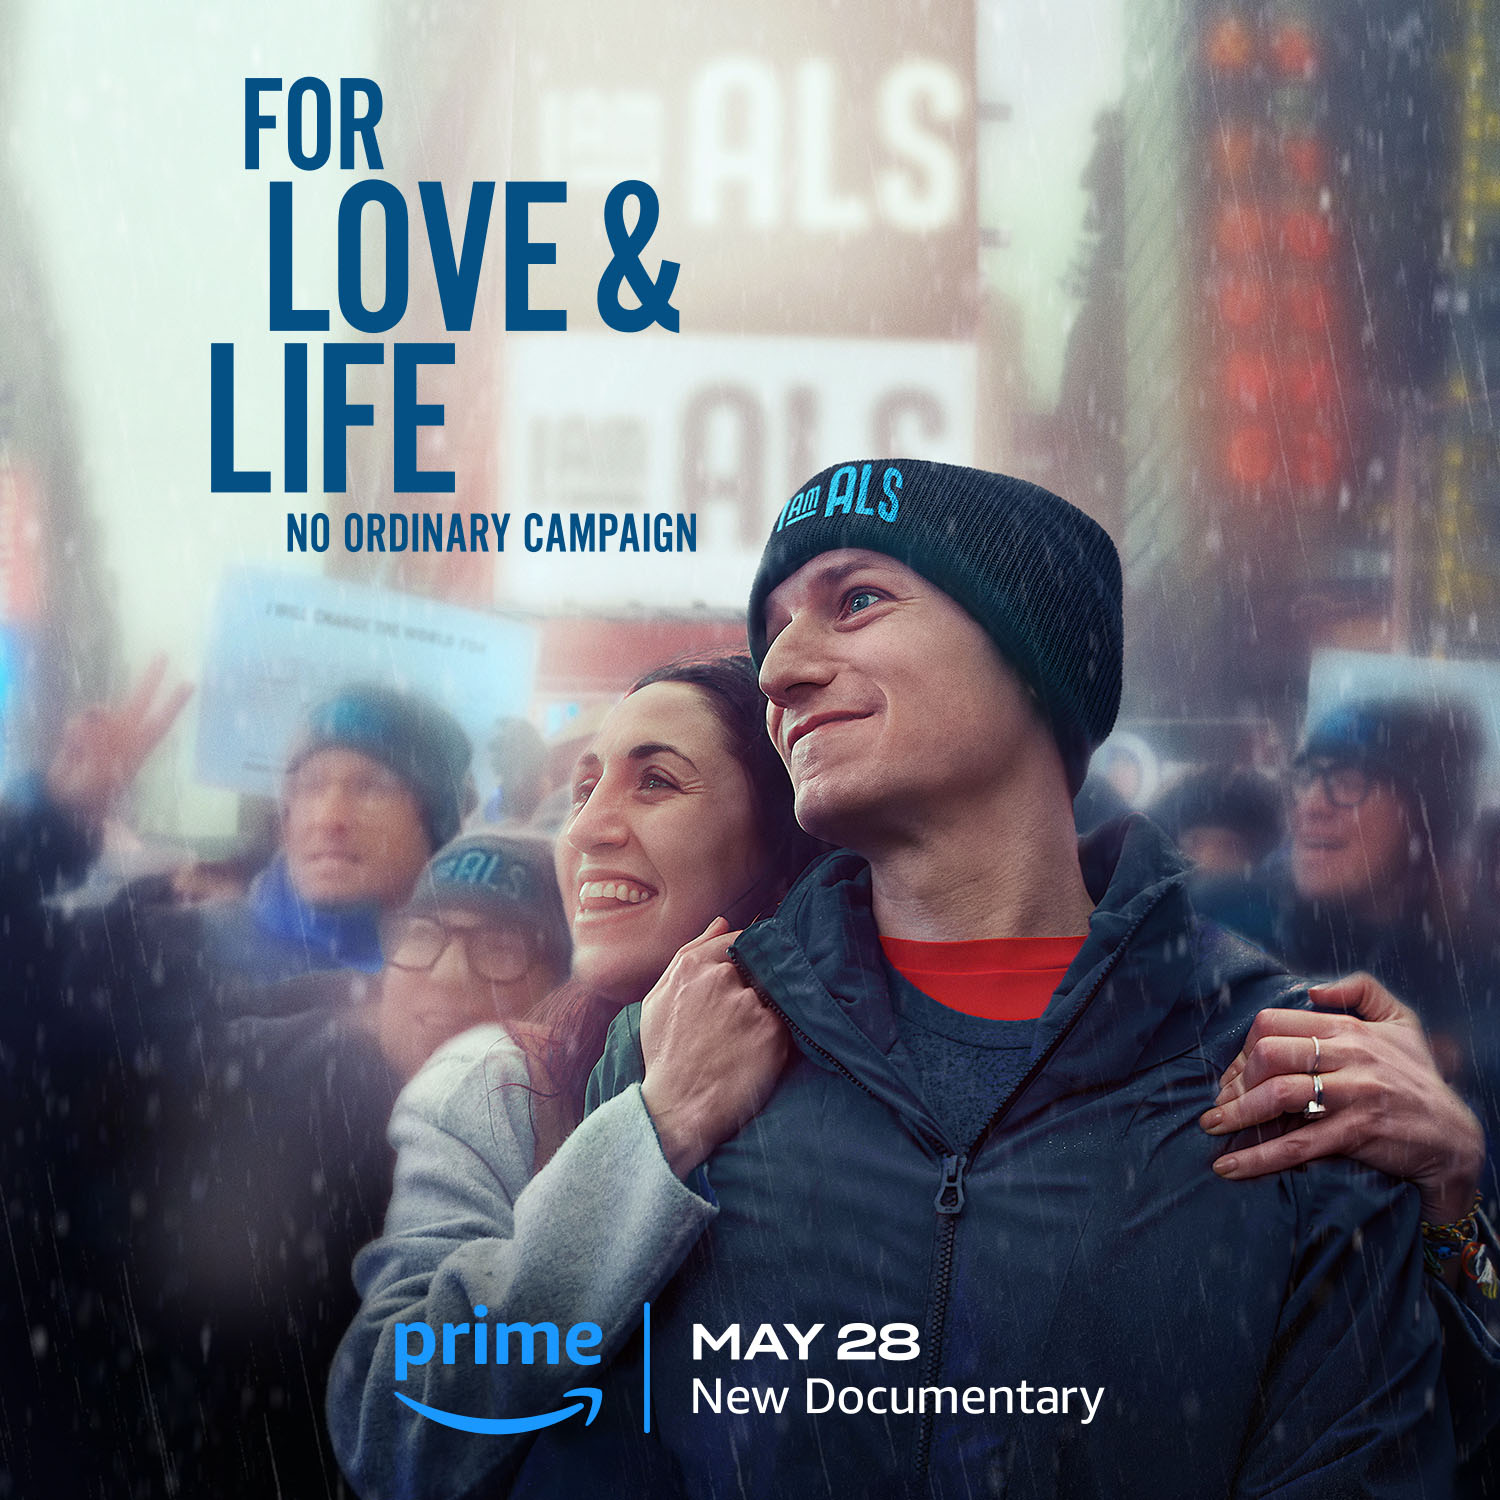 Movie poster of woman and man smiling and hugging in a crowd with a headline of “For Love & Life: No Ordinary Campaign" and footer of “Prime: May 28 New Documentary”